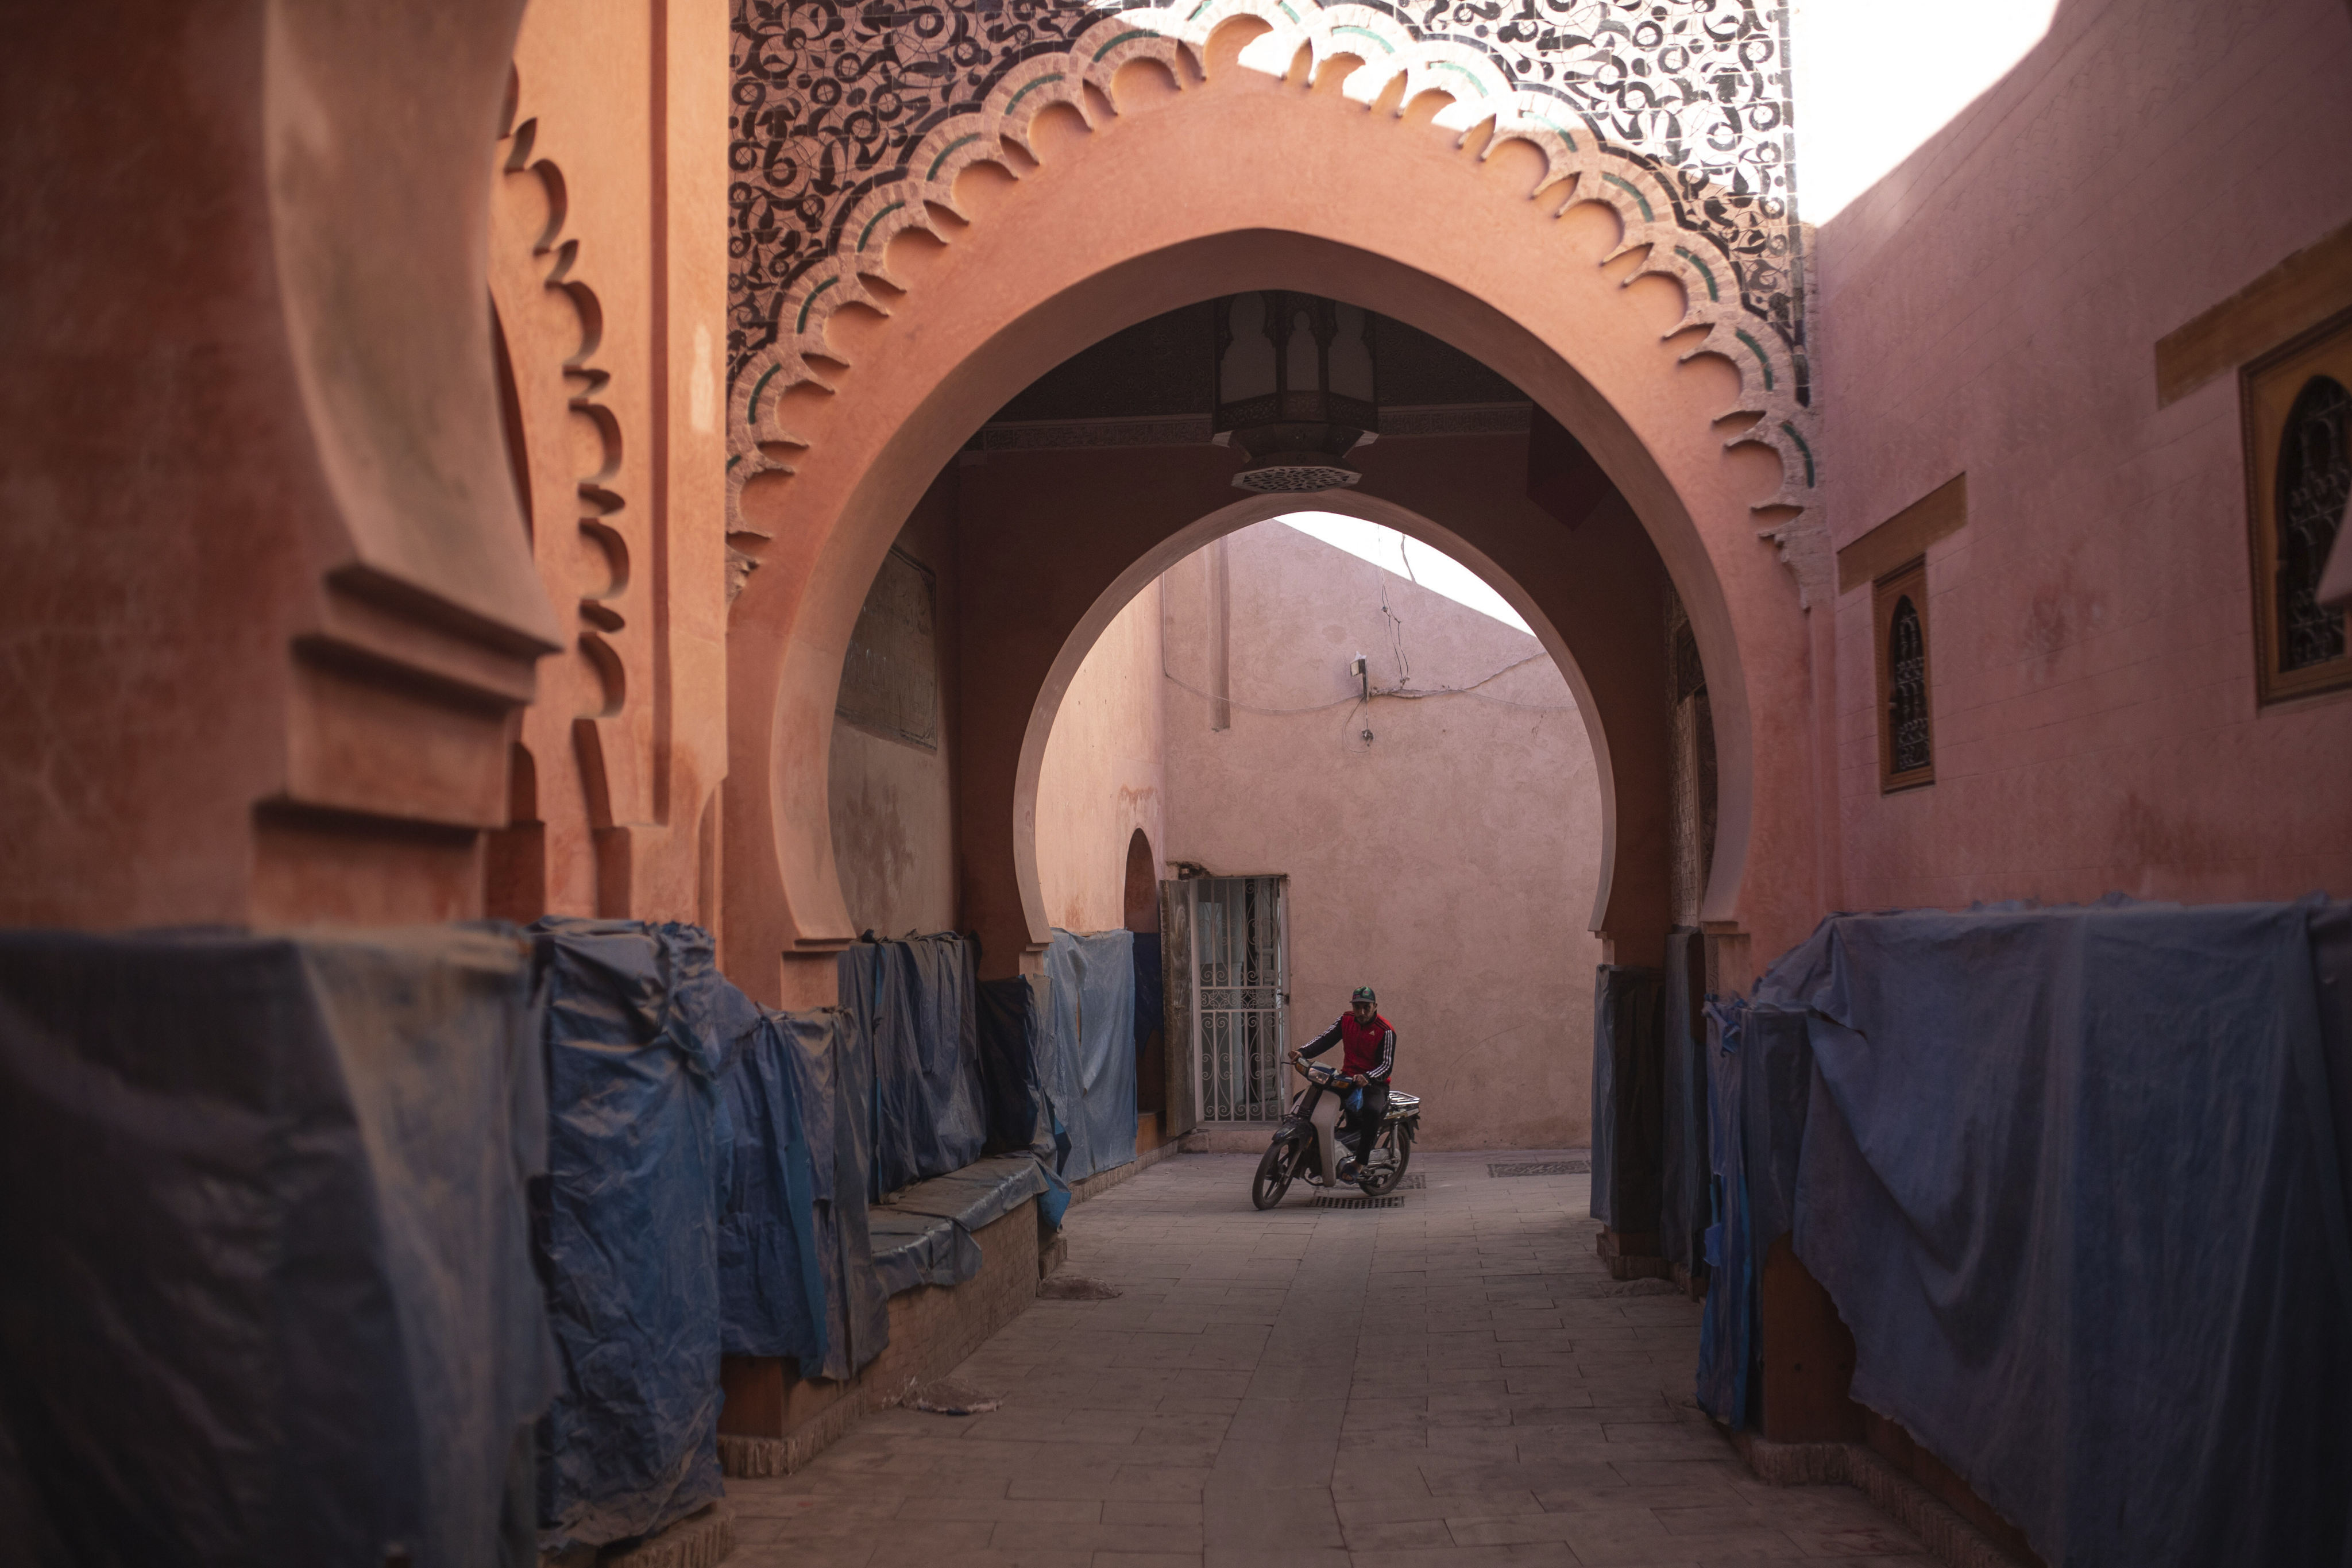 Morocco’s geographical position could work to China’s advantage, experts said. Photo: AP